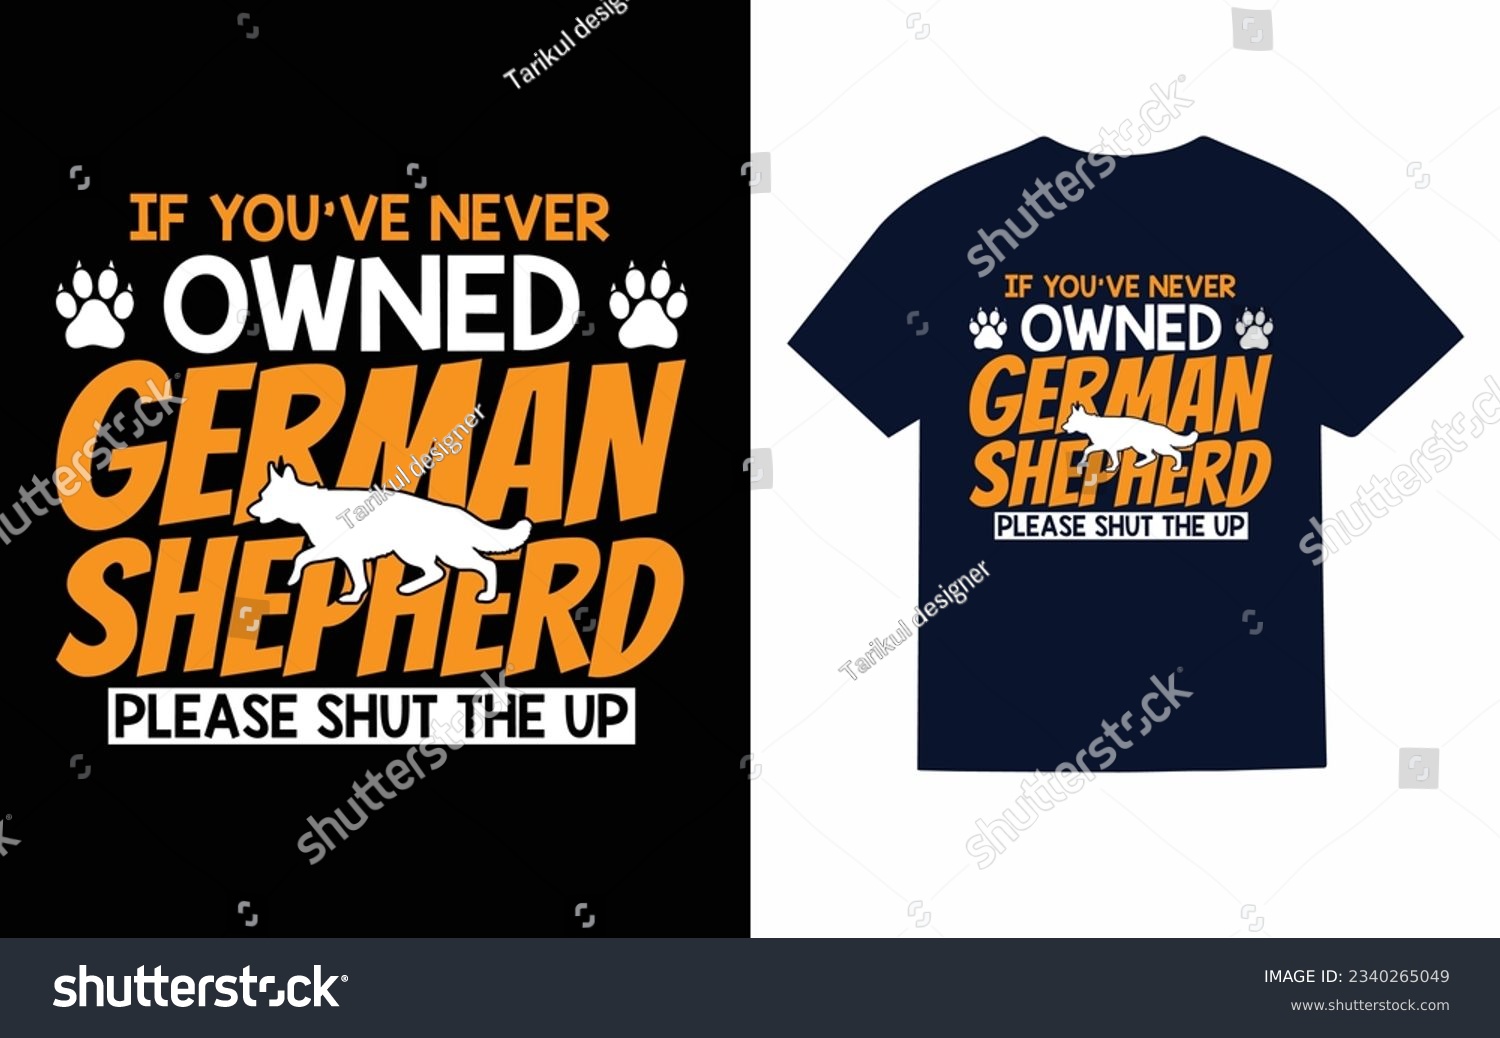 SVG of if you've never owned german shepherd please shut the up, shepherds dog t shirt design
 svg